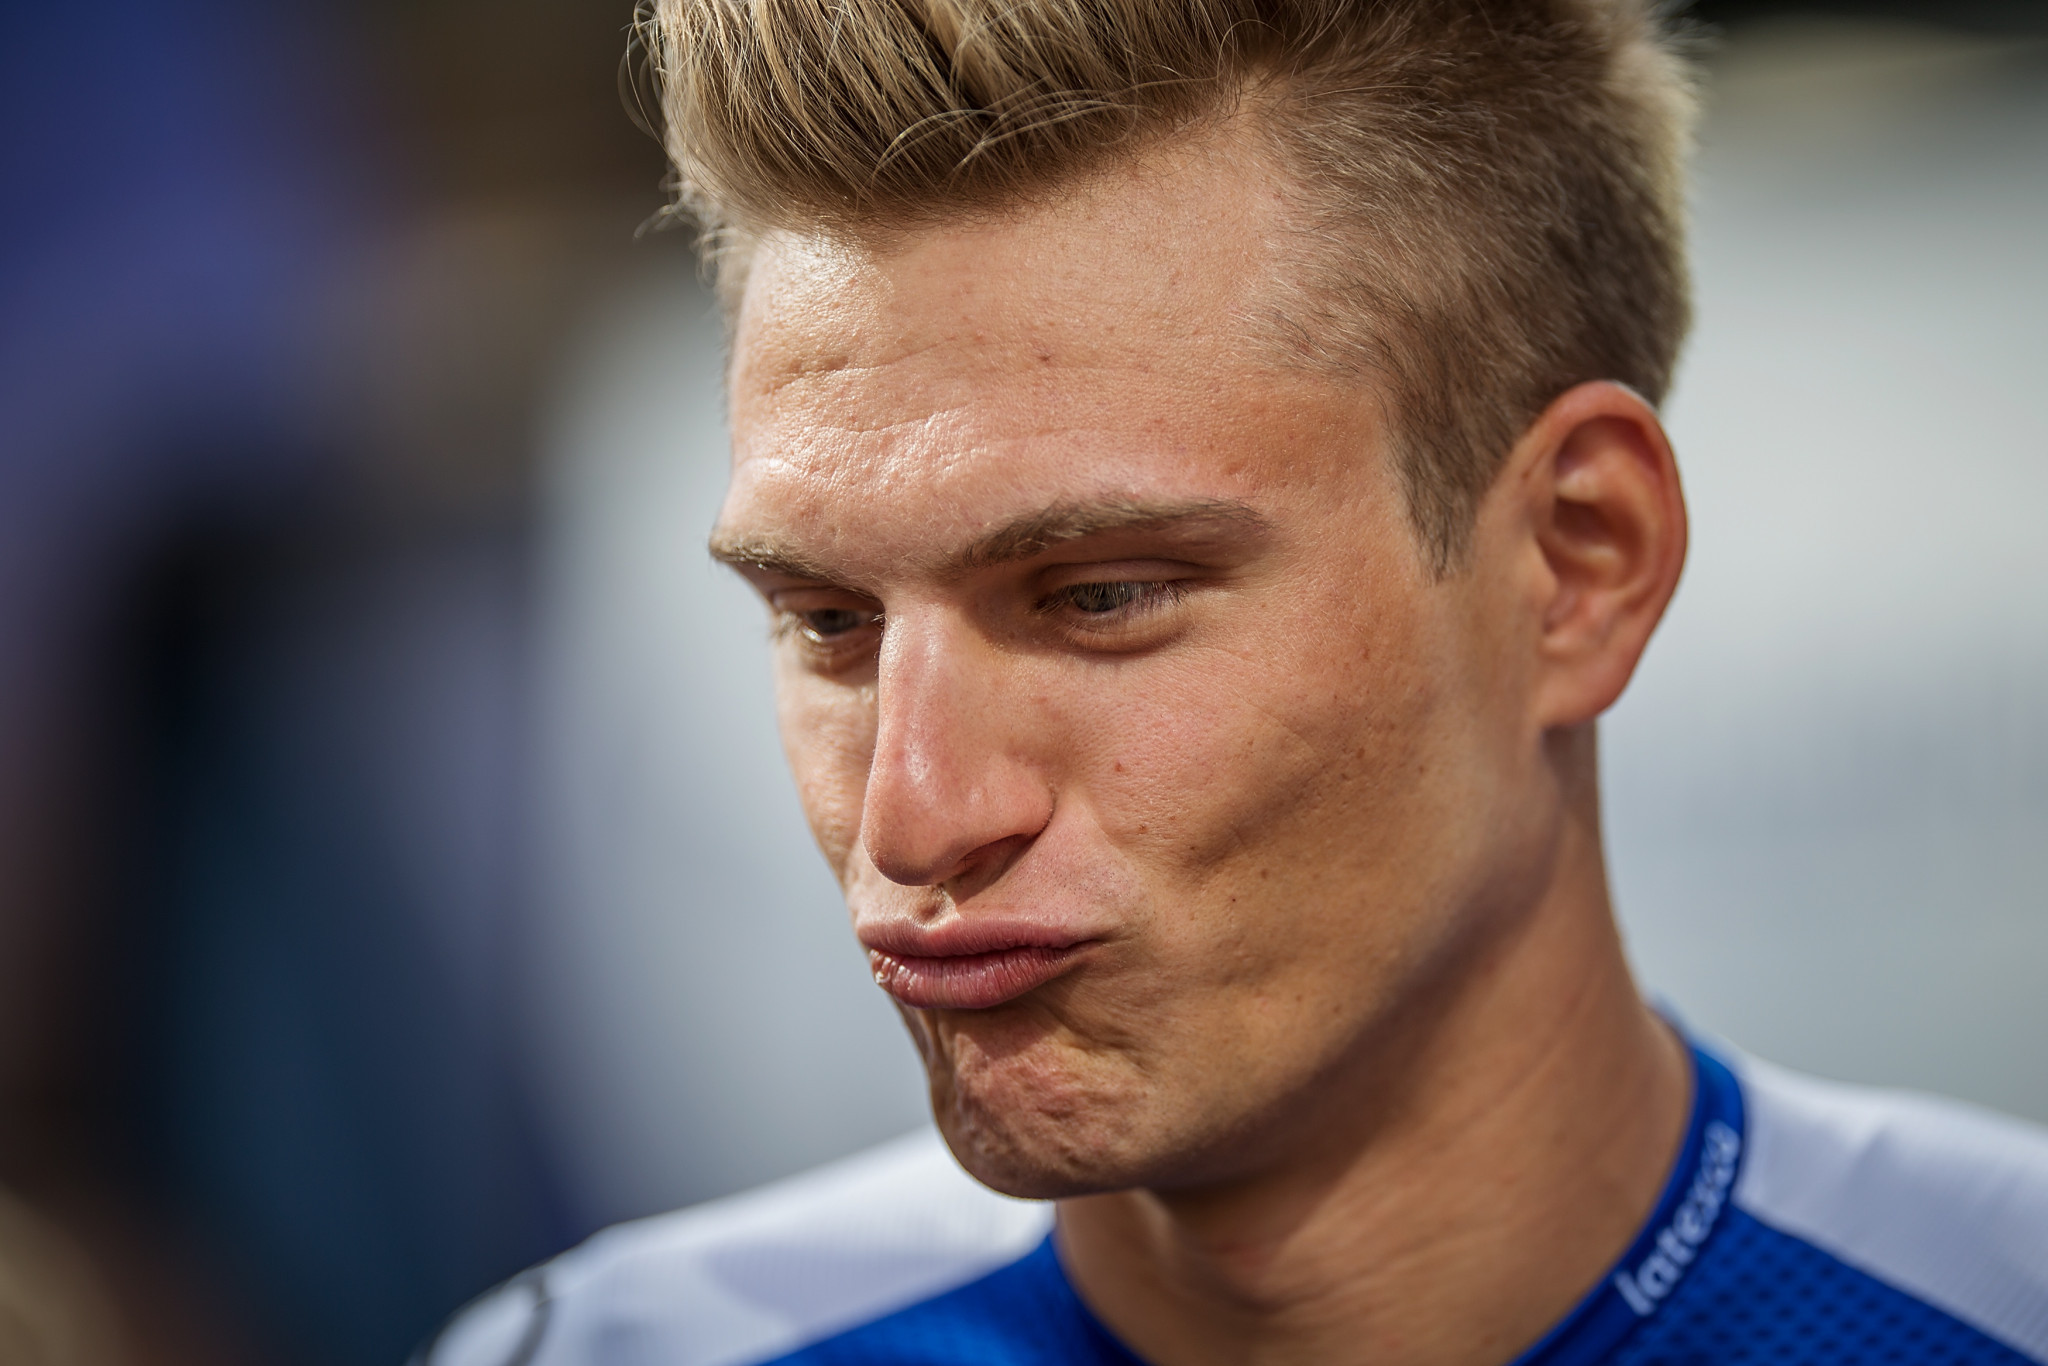 Marcel Kittel was influential off the bike as well as his success on it ©Getty Images